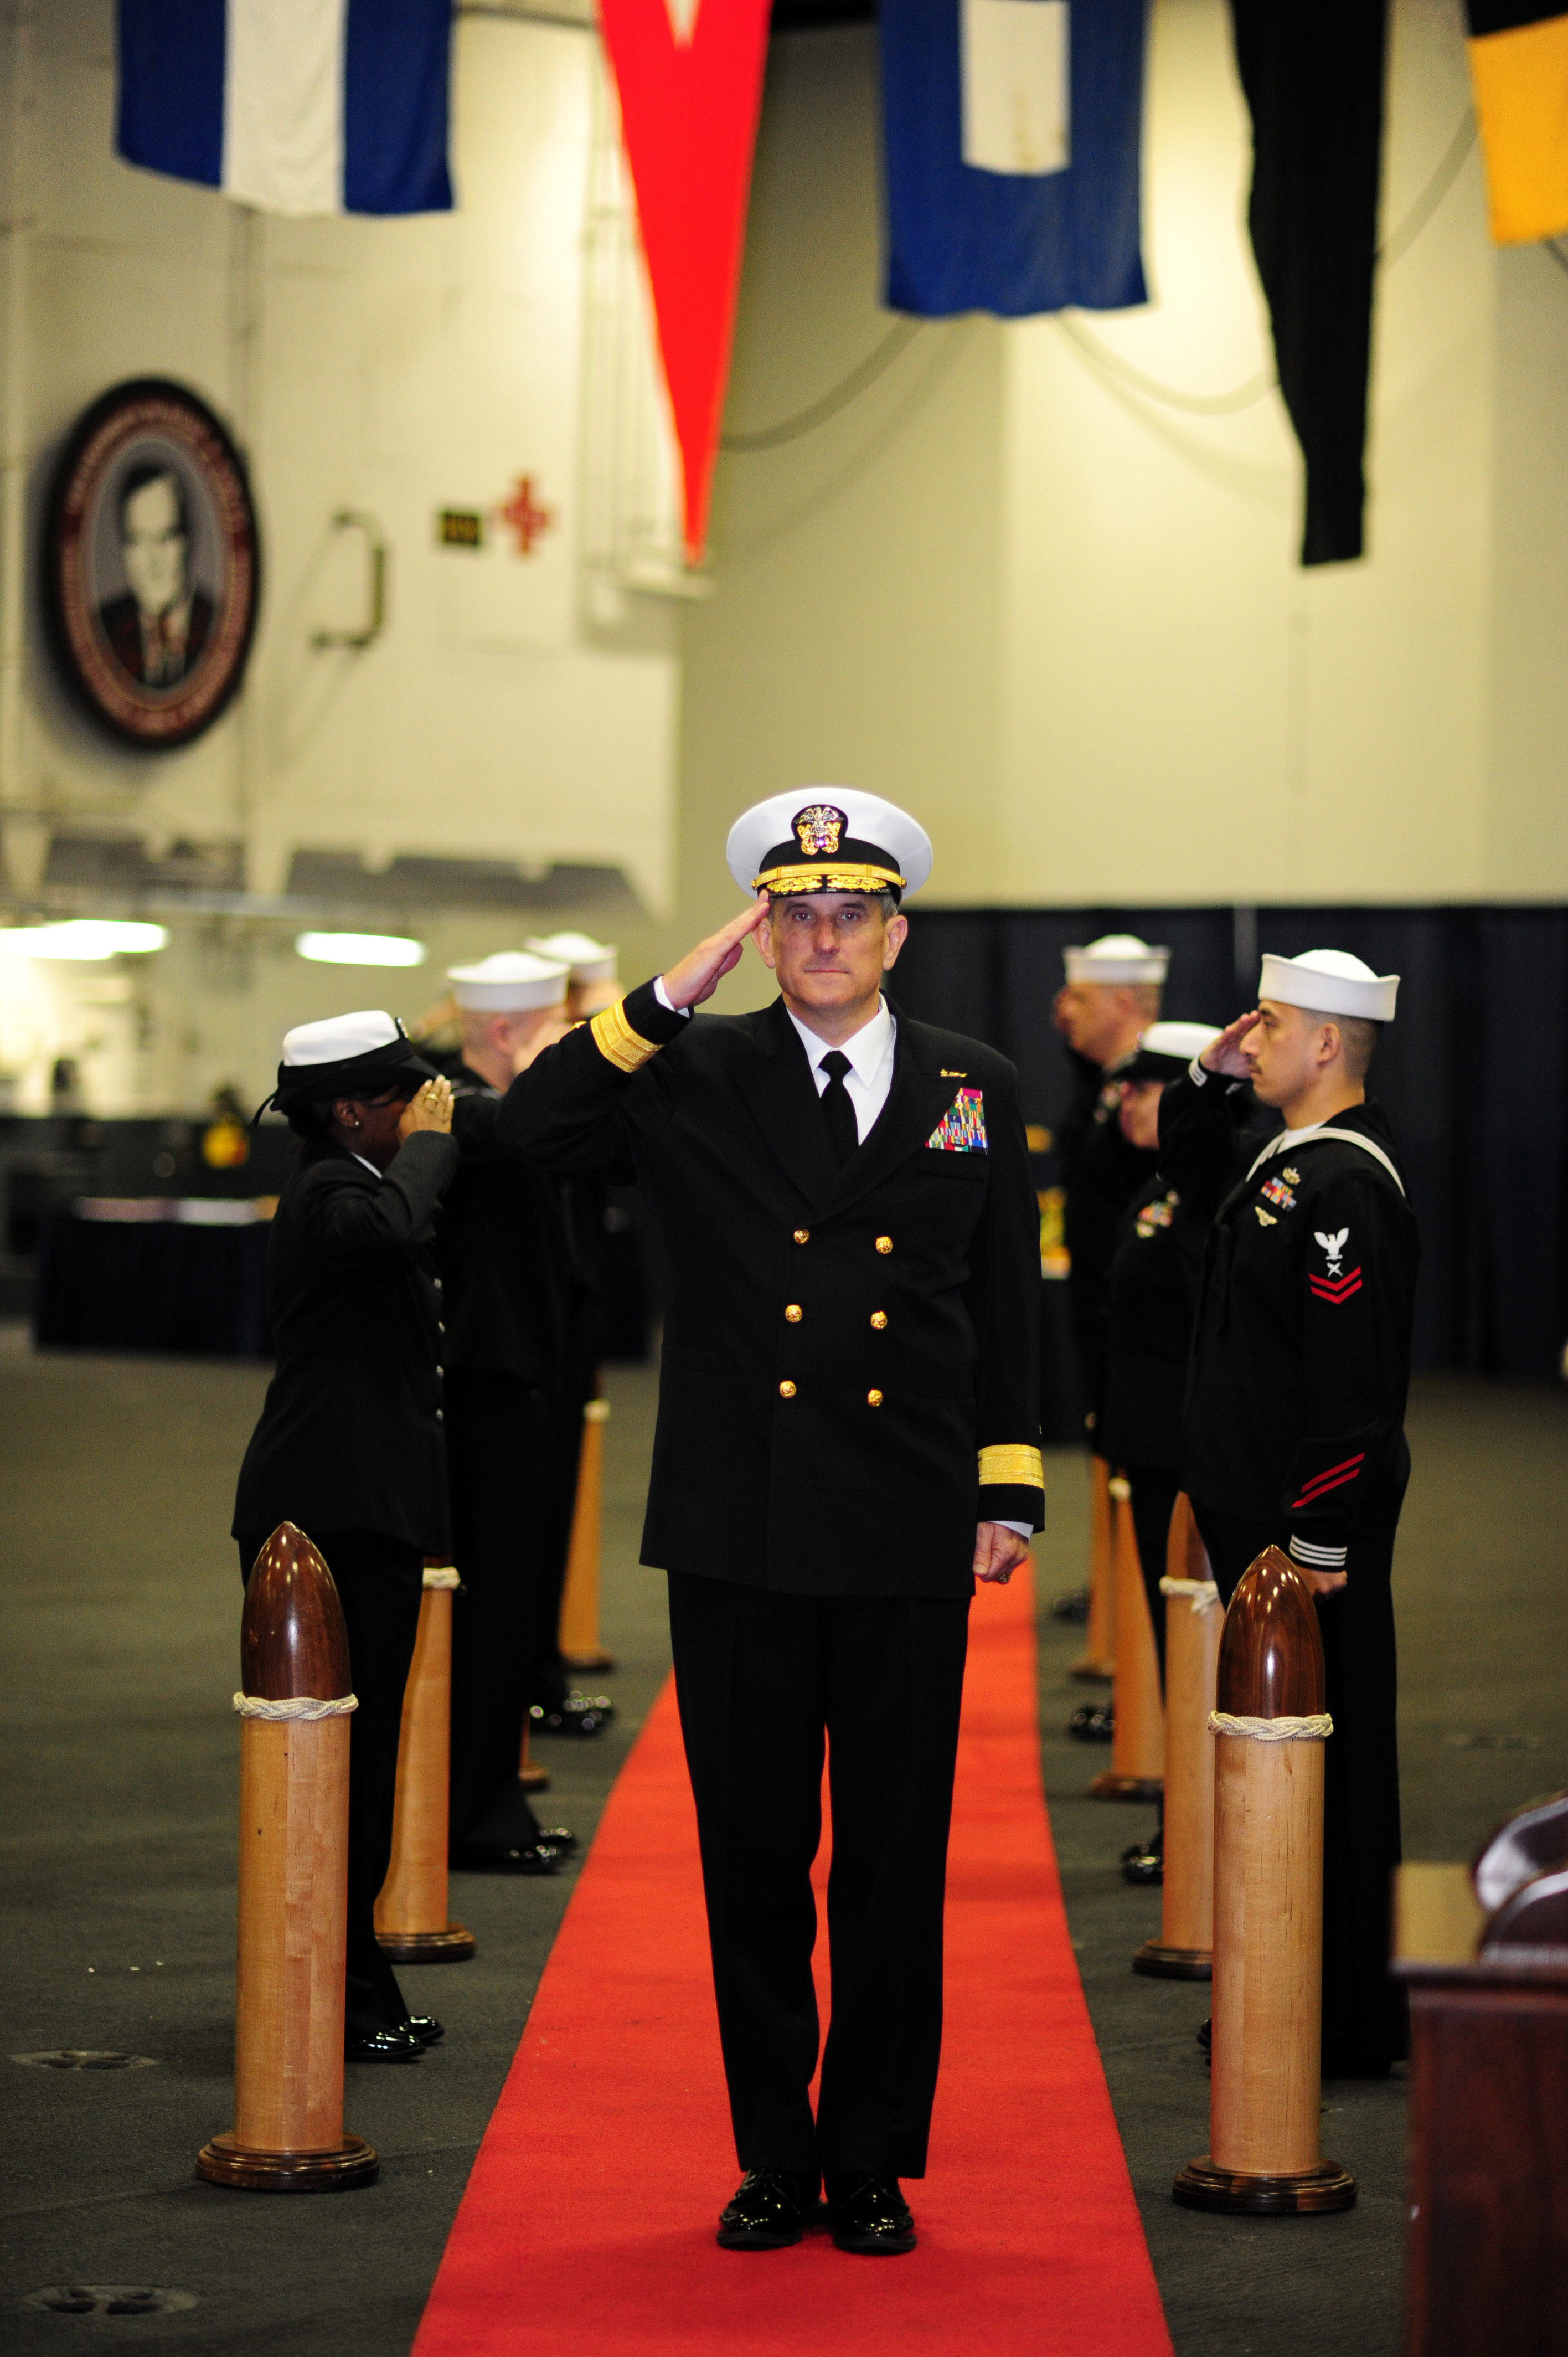 US Navy 120112-N-PW494-078 Rear Adm. Gregory M. Nosal passes through ceremonial sideboys during a change of command ceremony in which he relieved R